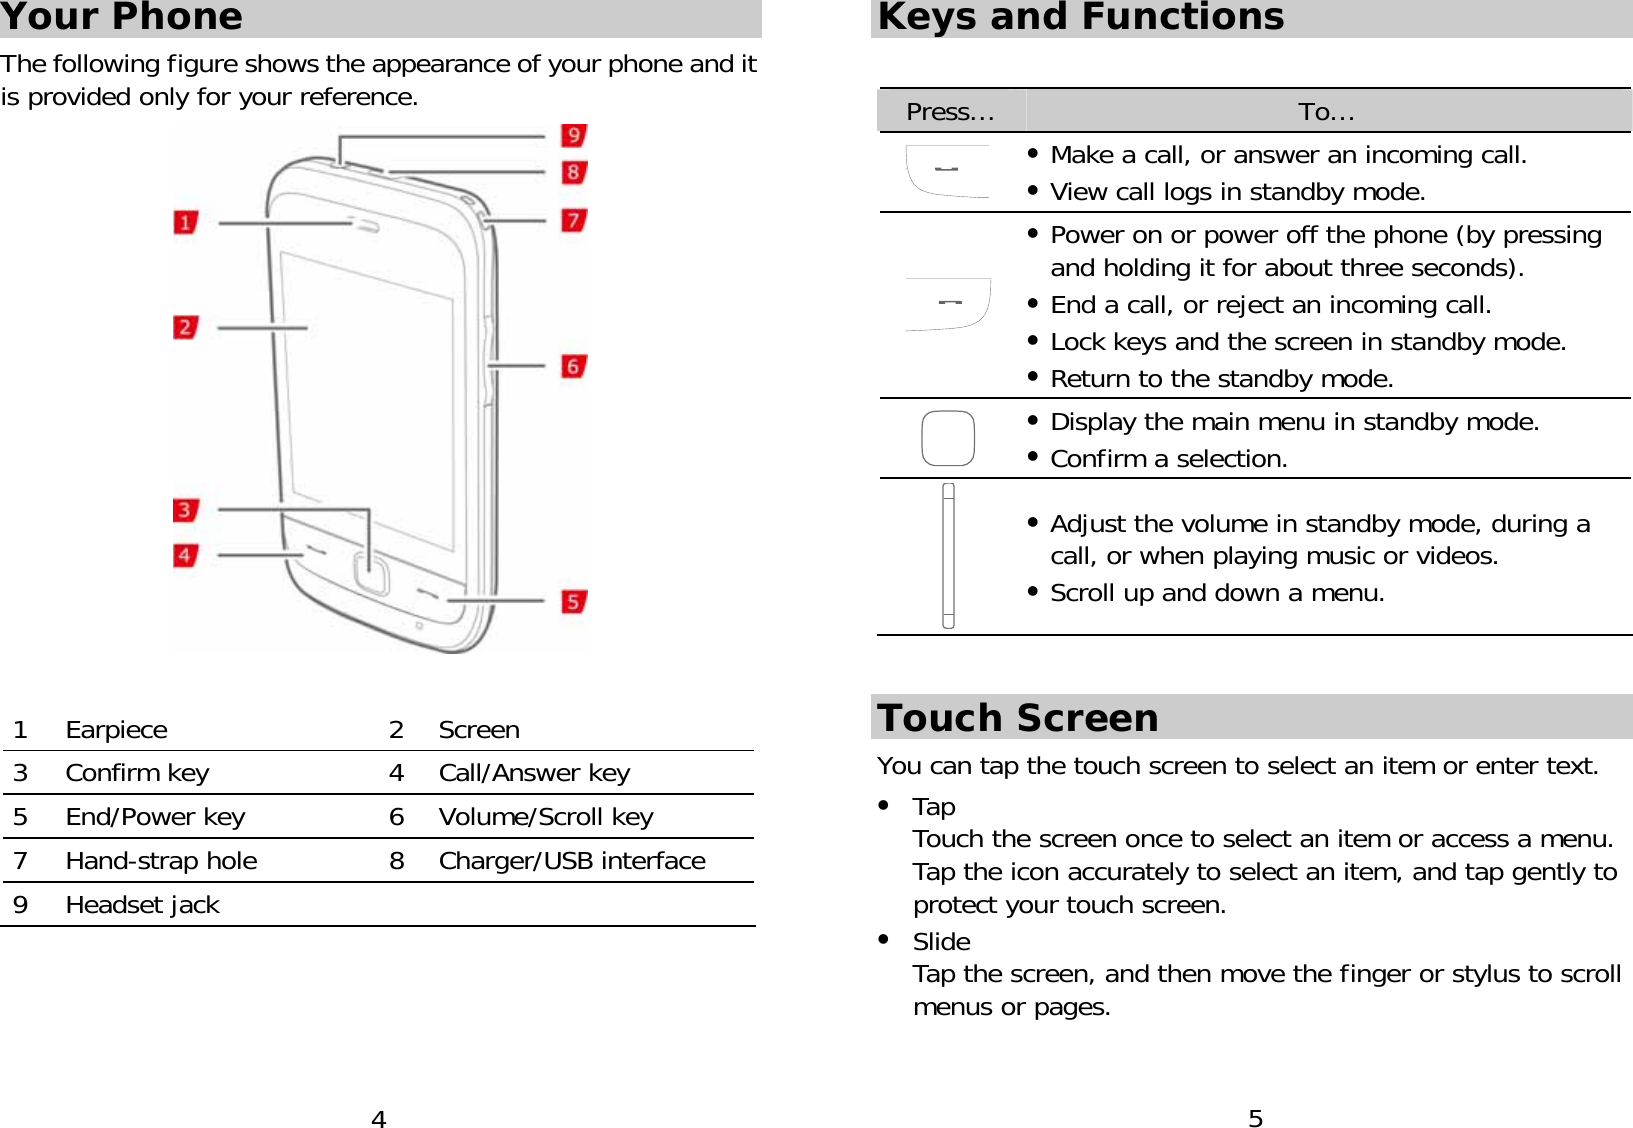 4 Your Phone The following figure shows the appearance of your phone and it is provided only for your reference.   1 Earpiece  2 Screen 3  Confirm key  4  Call/Answer key 5  End/Power key  6  Volume/Scroll key 7  Hand-strap hole  8  Charger/USB interface  9 Headset jack      5 Keys and Functions  Press… To…  z Make a call, or answer an incoming call. z View call logs in standby mode. z Power on or power off the phone (by pressing and holding it for about three seconds). z End a call, or reject an incoming call. z Lock keys and the screen in standby mode. z Return to the standby mode.  z Display the main menu in standby mode. z Confirm a selection.  z Adjust the volume in standby mode, during a call, or when playing music or videos. z Scroll up and down a menu.  Touch Screen You can tap the touch screen to select an item or enter text. z Tap Touch the screen once to select an item or access a menu.  Tap the icon accurately to select an item, and tap gently to protect your touch screen. z Slide Tap the screen, and then move the finger or stylus to scroll menus or pages. 